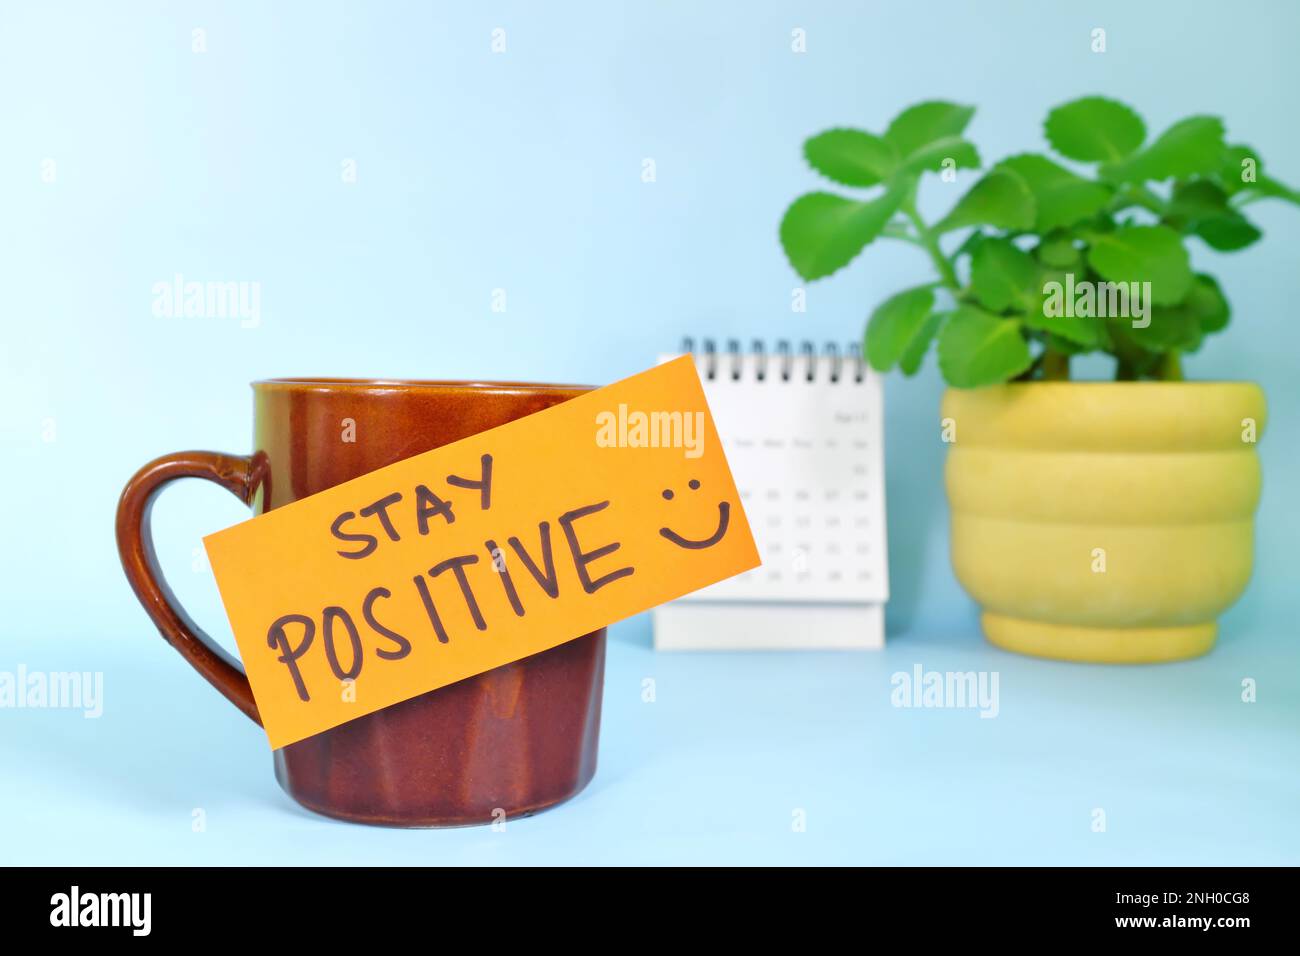 https://c8.alamy.com/comp/2NH0CG8/stay-positive-positivity-reminder-concept-selective-focus-of-a-cup-of-coffee-with-handwritten-bright-paper-message-note-2NH0CG8.jpg